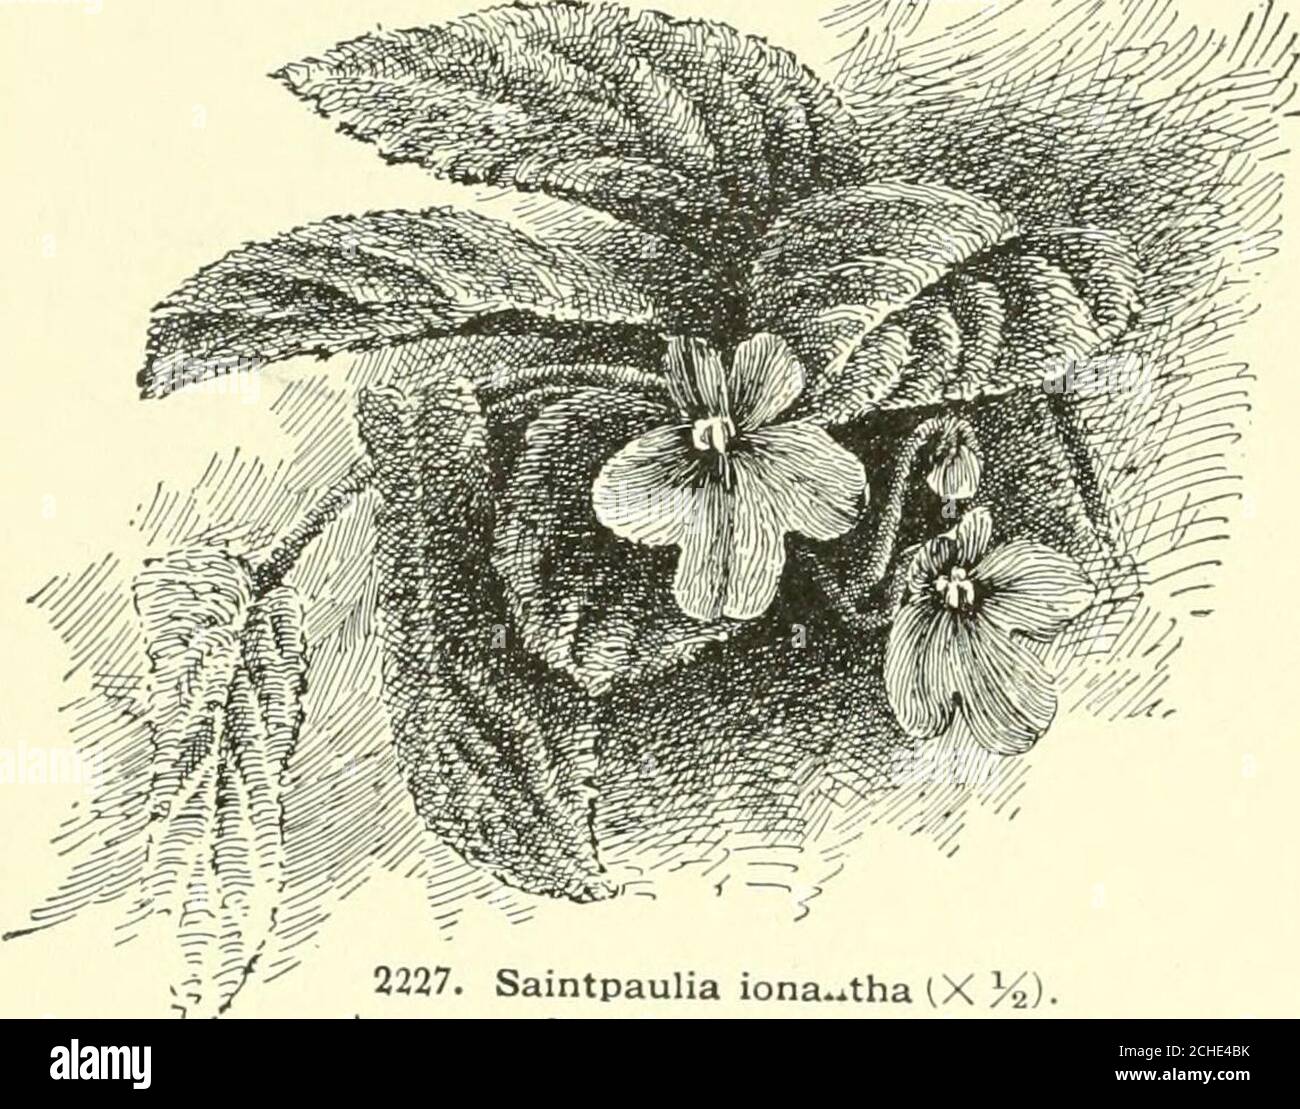 . Cyclopedia of American horticulture, comprising suggestions for cultivation of horticultural plants, descriptions of the species of fruits, vegetables, flowers and ornamental plants sold in the United States and Canada, together with geographical and biographical sketches, and a synopsis of the vegetable kingdom . yrum stans. Also appliedto species of Hypericum, Primula and Symphoricarpus. SAINTPAtLIA (from the discoverer of the plant,Baron Walter von Saint Paul). Gesnercicew. UsambaraViolet. A monotypic genus from eastern tropicalAfrica, where it was found growing in wooded places infissure Stock Photo